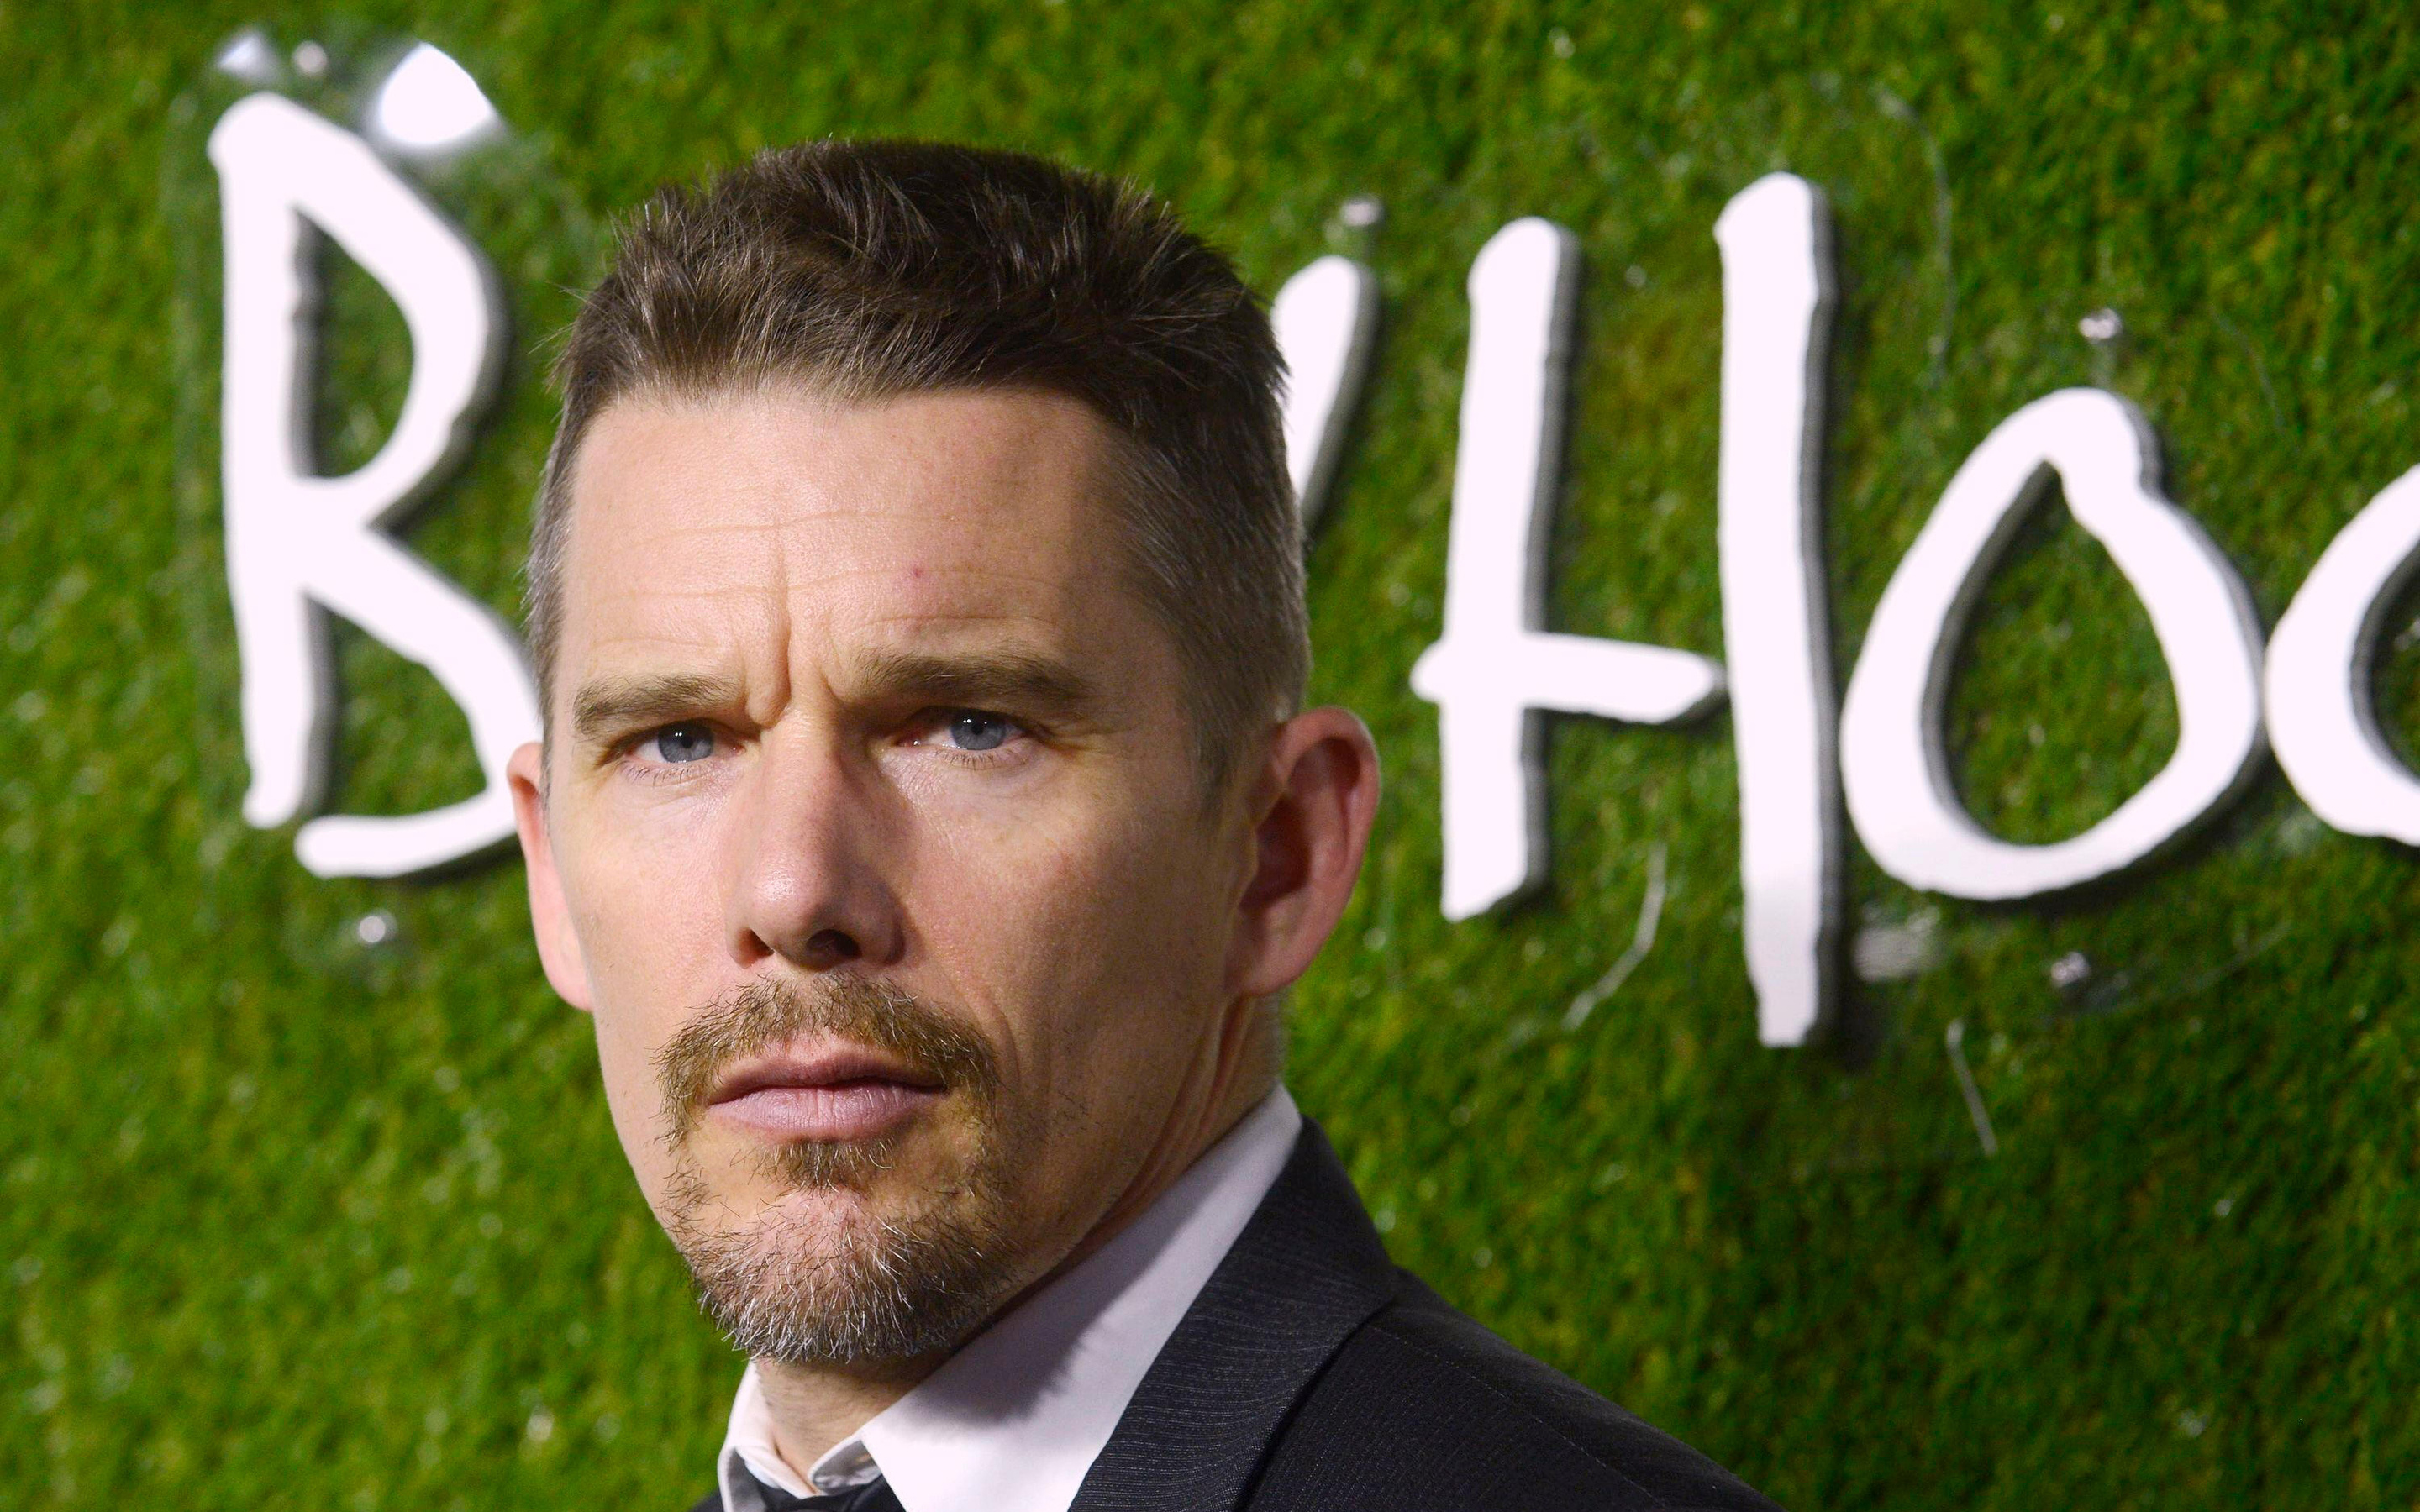 Ethan Hawke: American actor, screenwriter, and director, Nominated for the 'Academy Award'. 2880x1800 HD Wallpaper.